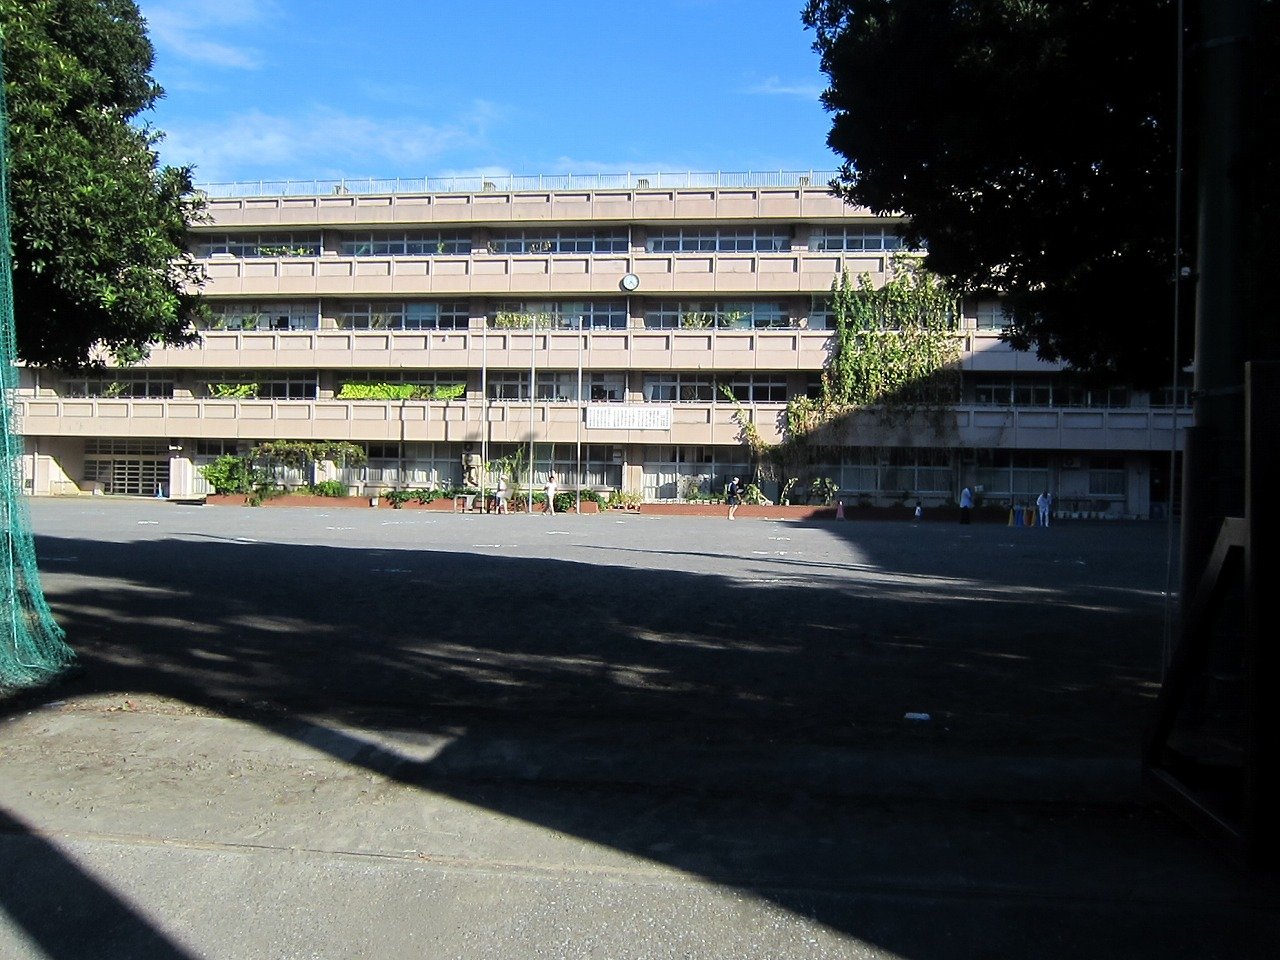 Primary school. Municipal Hie to elementary school (elementary school) 20m